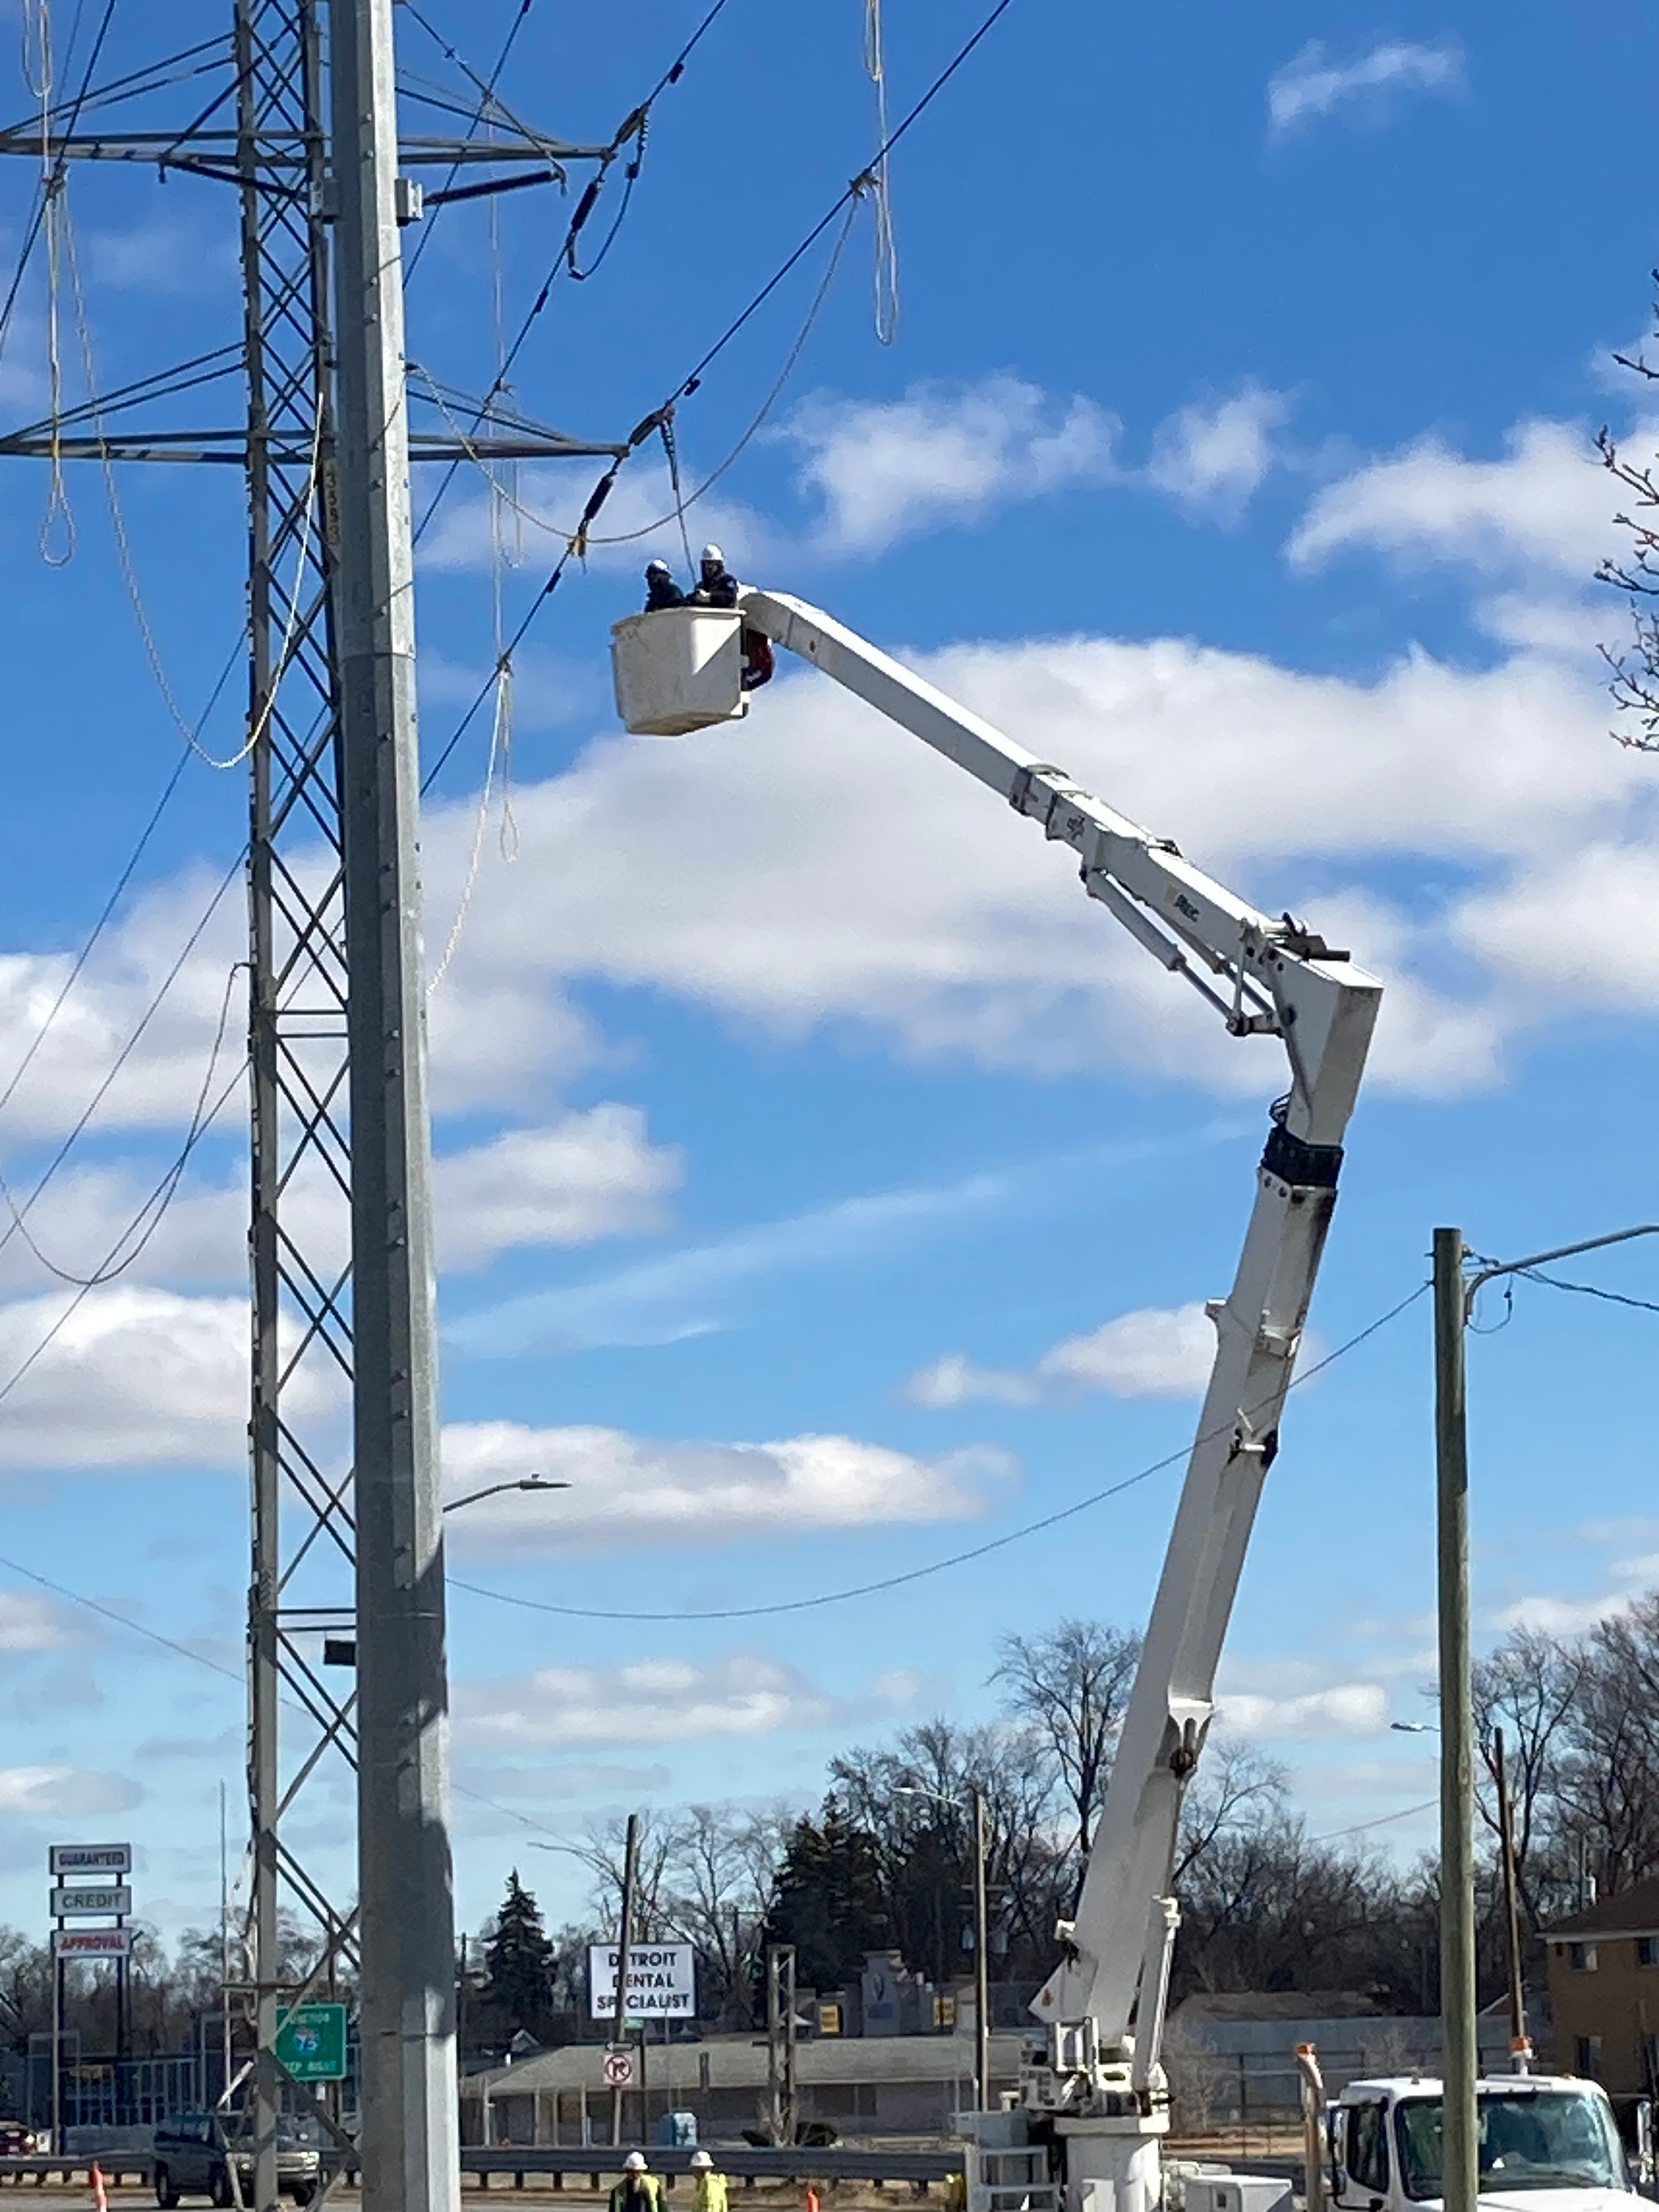 Electrical repair workers in an altec cherry picker work on a high tension line along 8 Mile near Hazel Park.